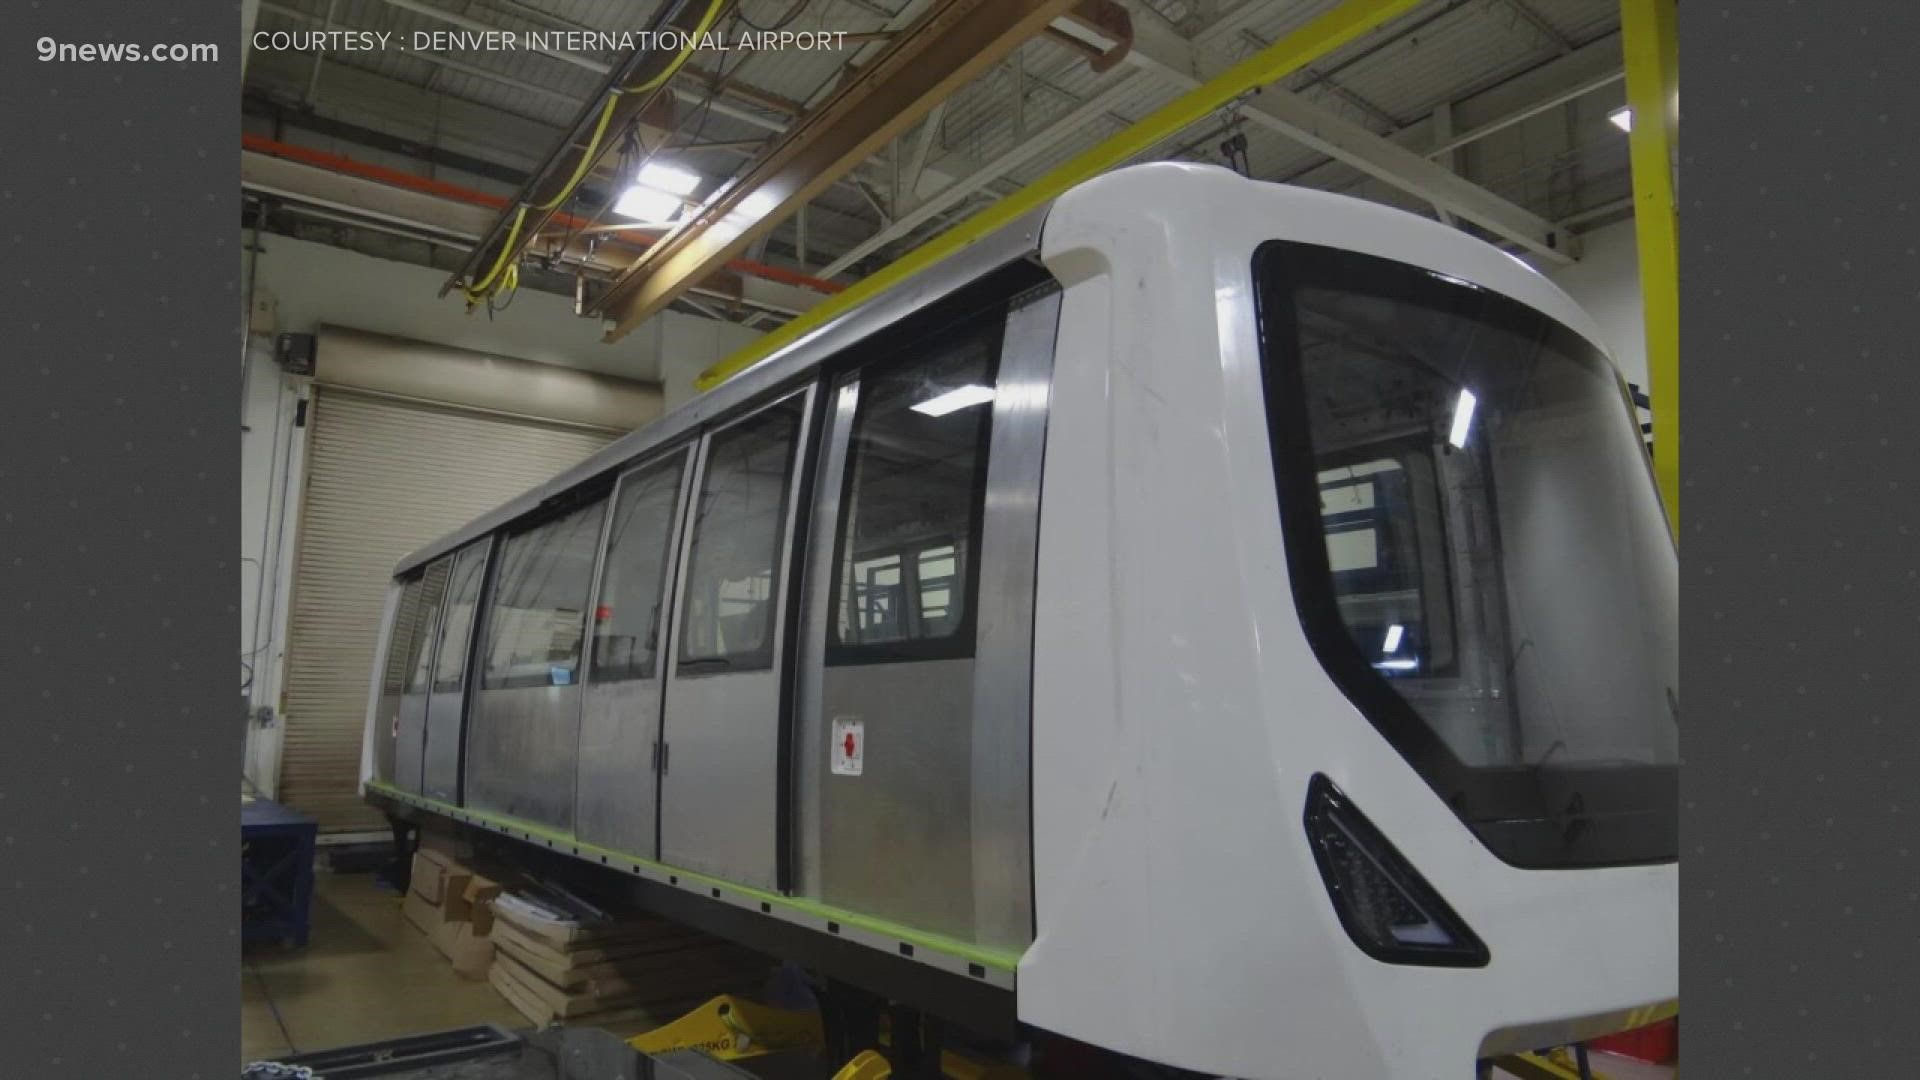 Denver International Airport currently has 31 train cars in its fleet. About half are past their shelf life, so DIA wants to replace all of them and add 10 more.